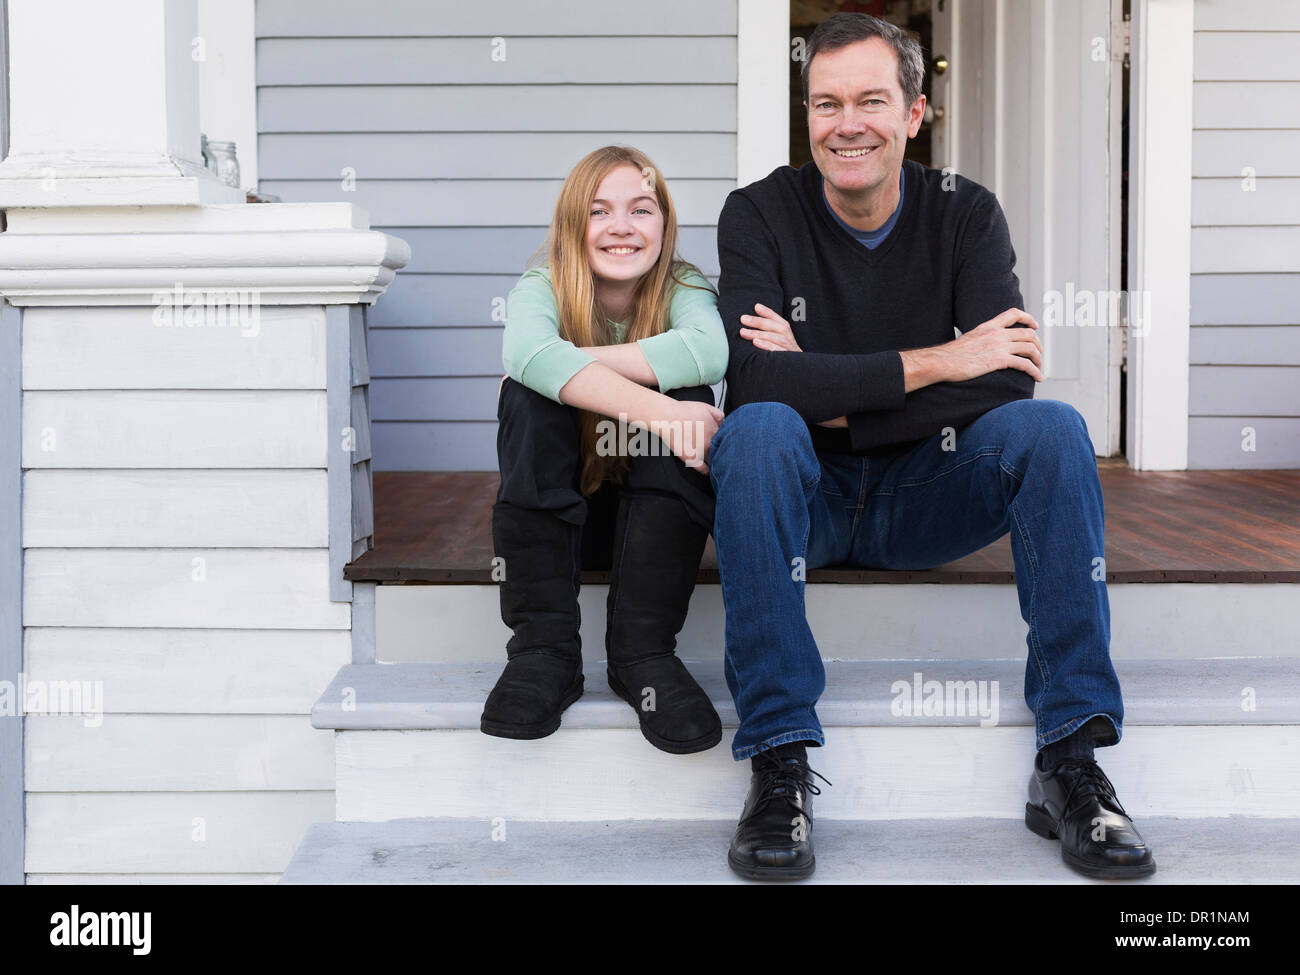 Caucasian father and daughter smiling on steps Stock Photo